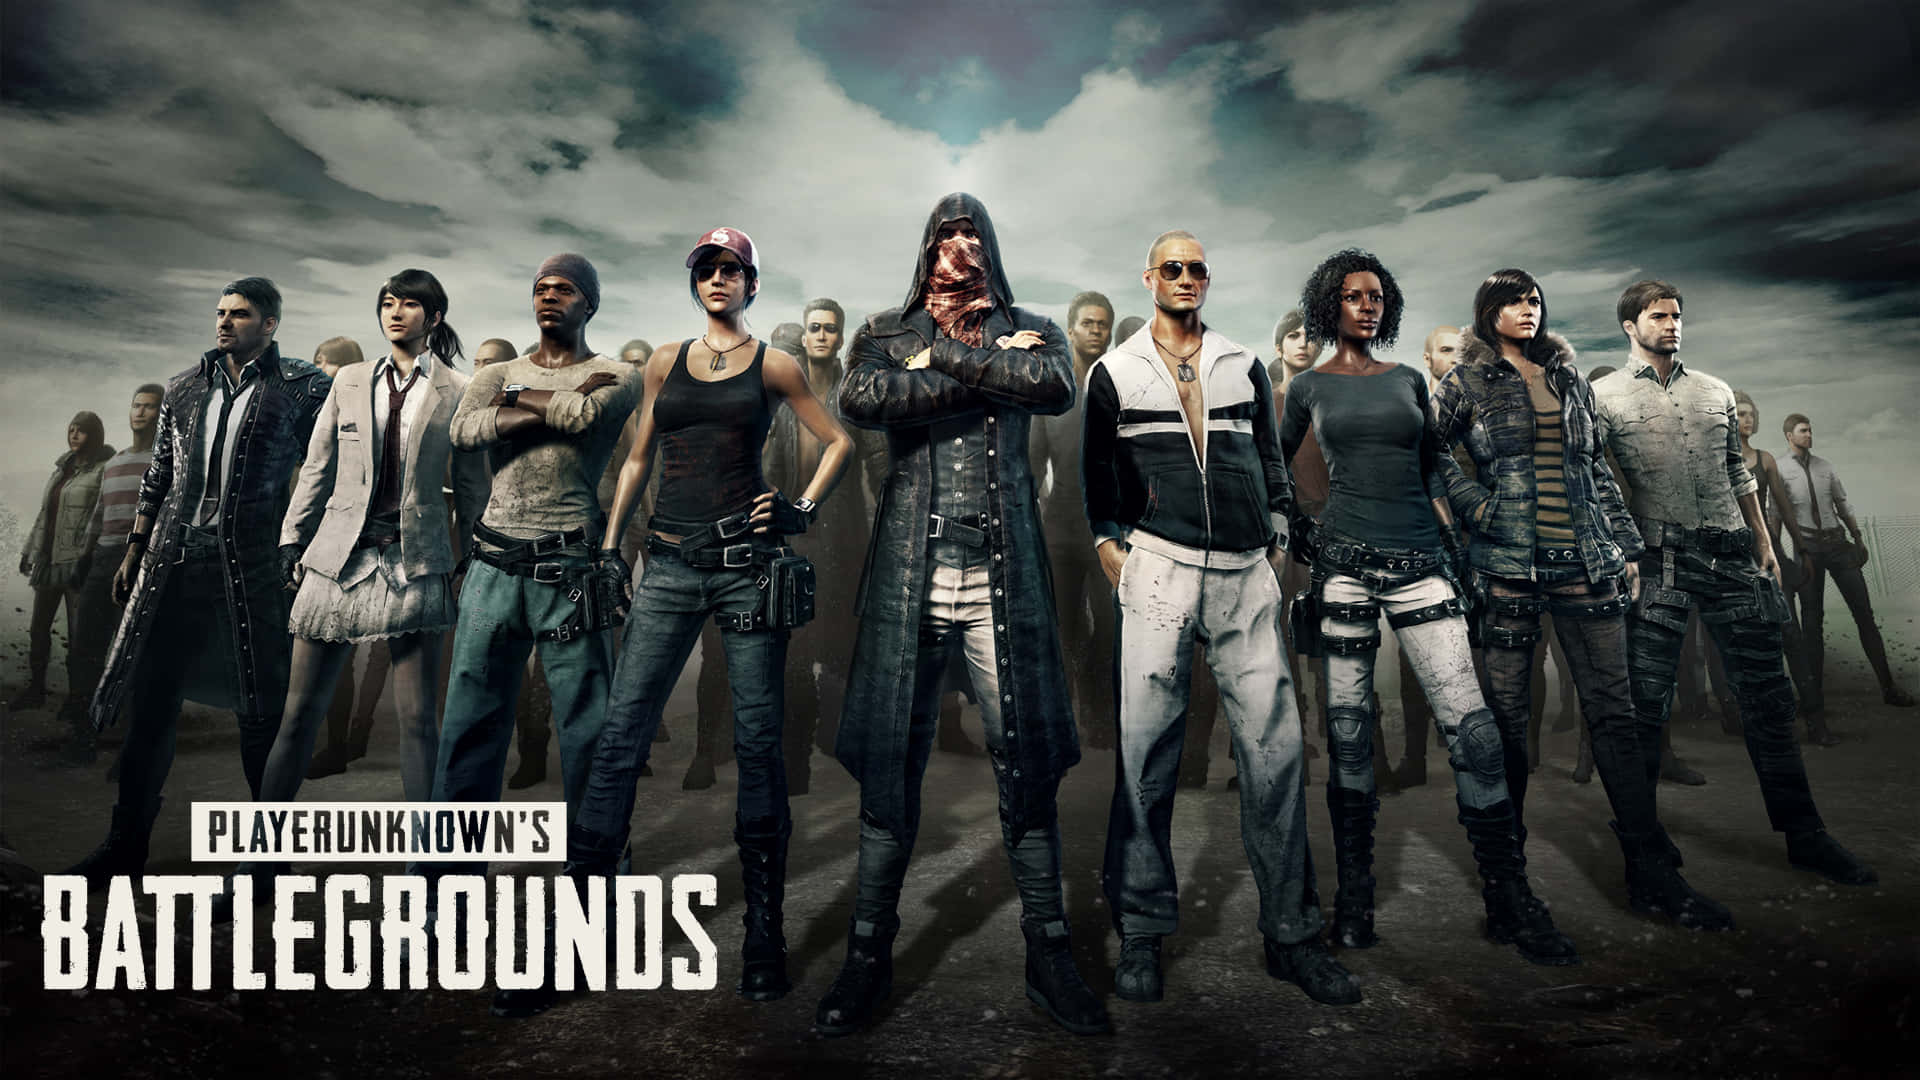 Image  Wage War in the World of Playerunknown's Battlegrounds